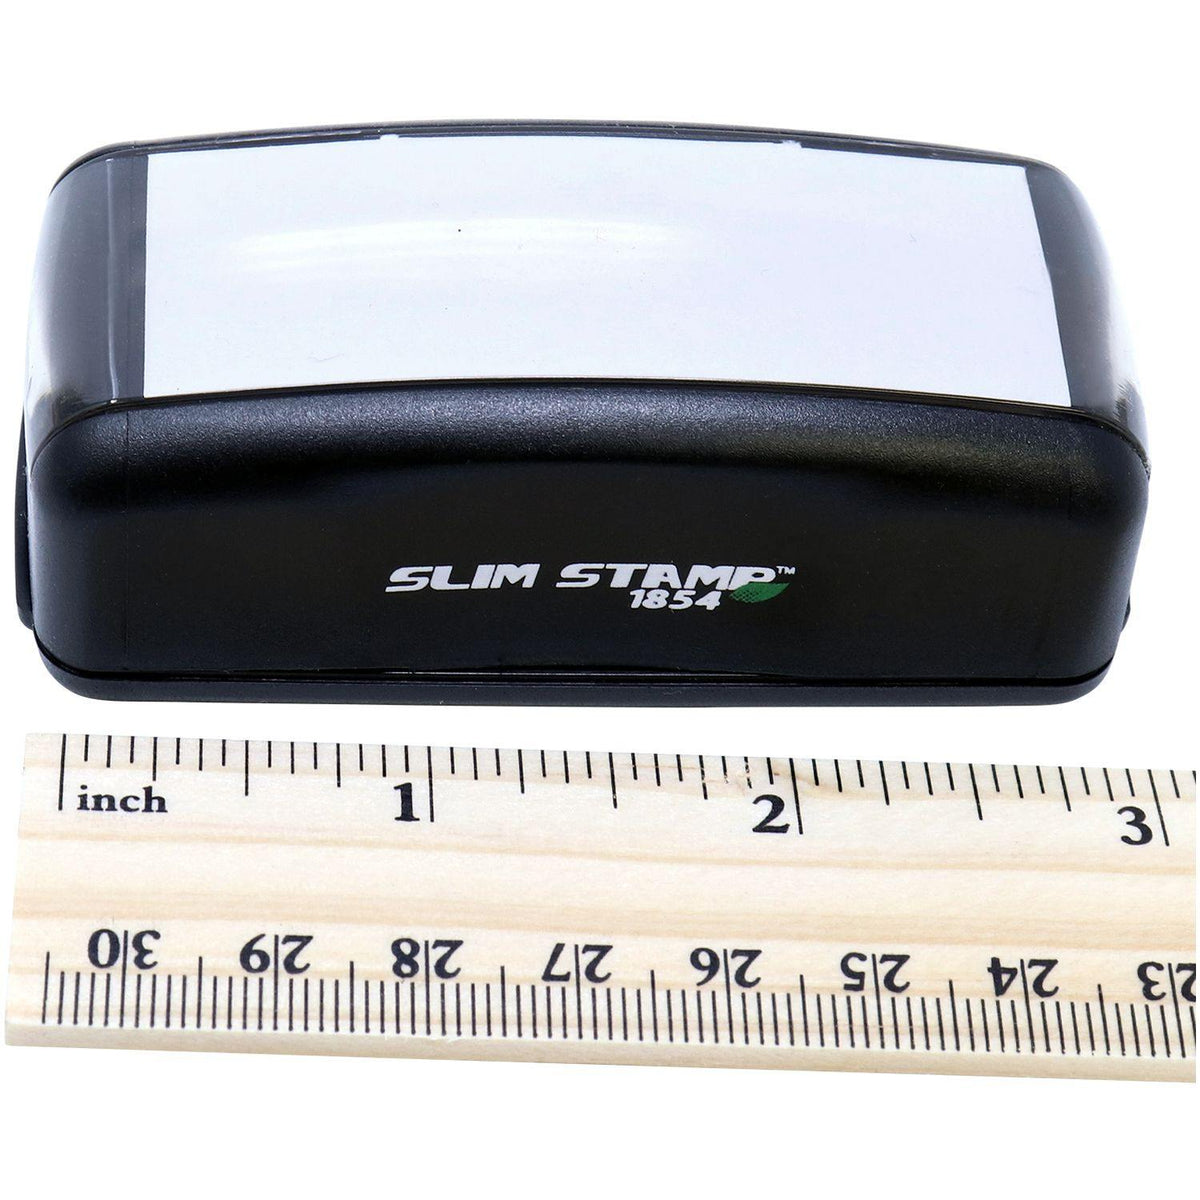 Measurement Large Pre Inked Damages Stamp with Ruler